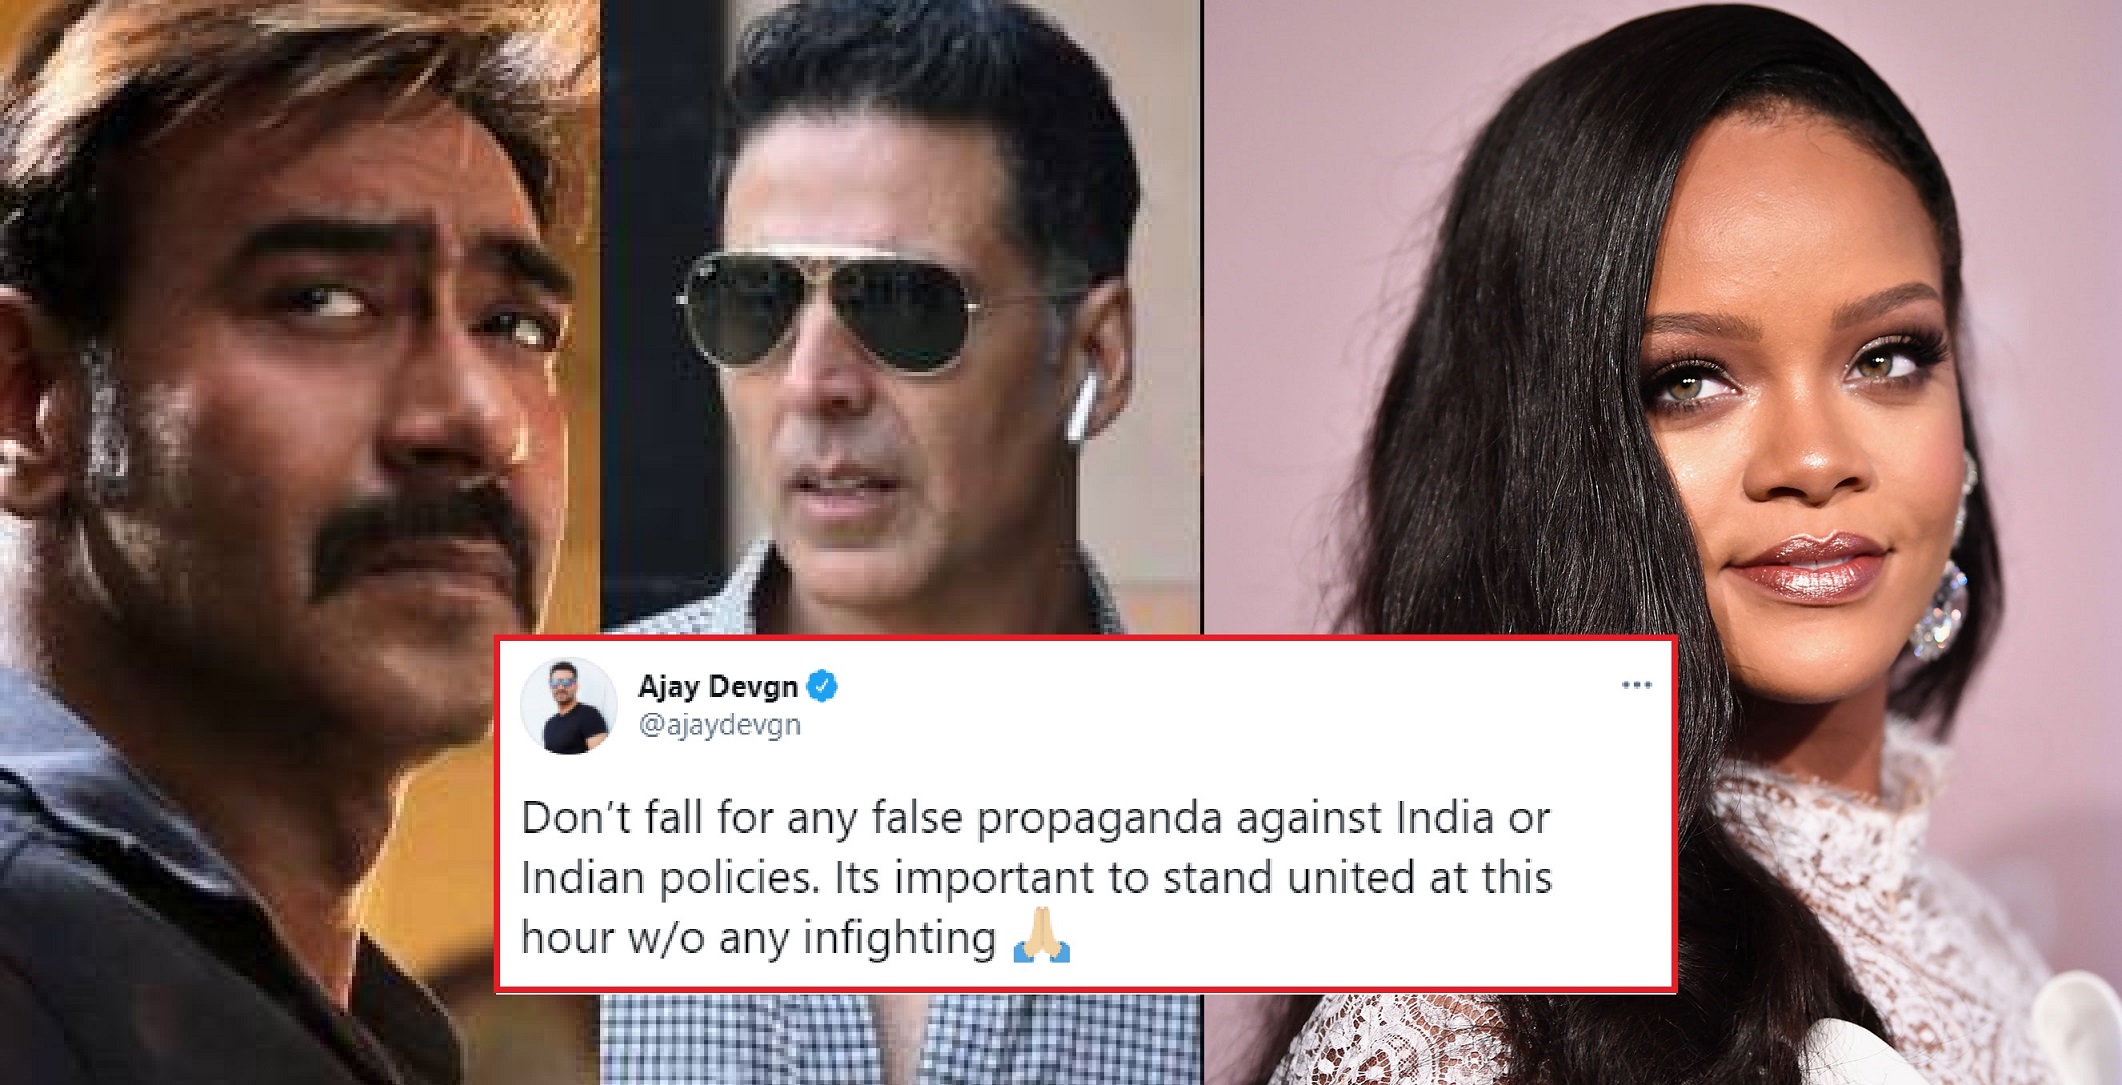 Ajay Devgn, Akshay Kumar, Suniel Shetty & More Stand With Government After Rihanna’s Tweet on Farmer Protests